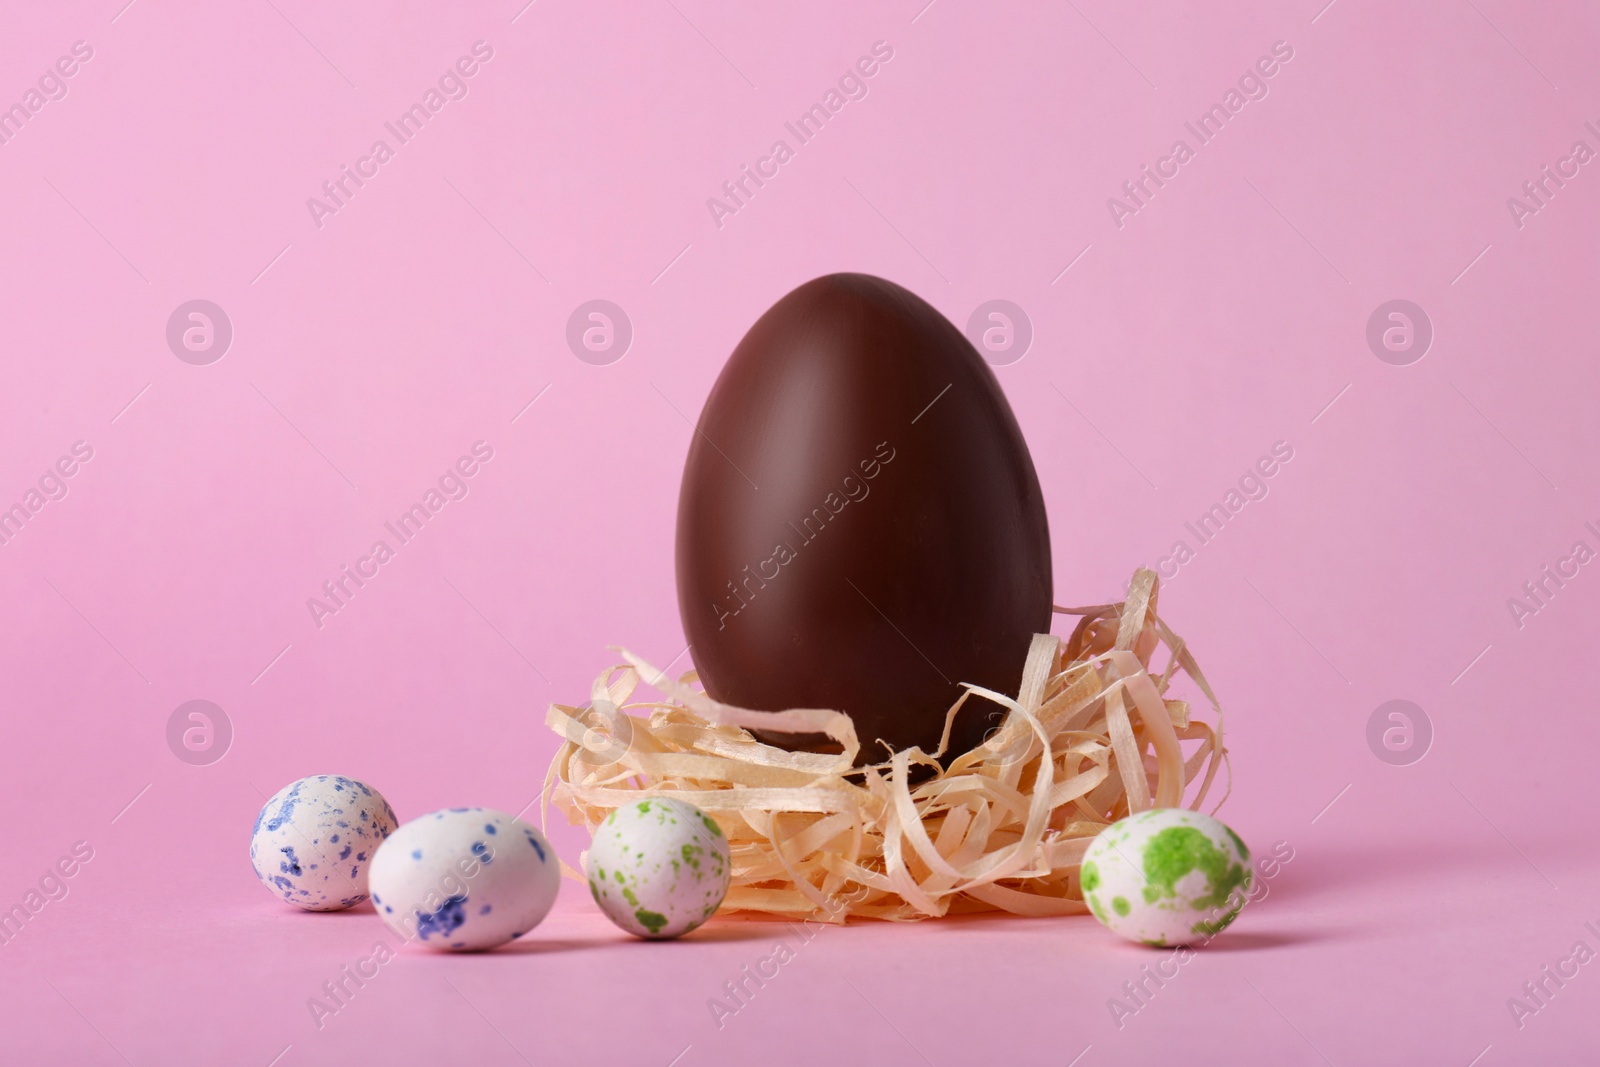 Photo of Decorative nest with tasty chocolate egg and candies on pink background